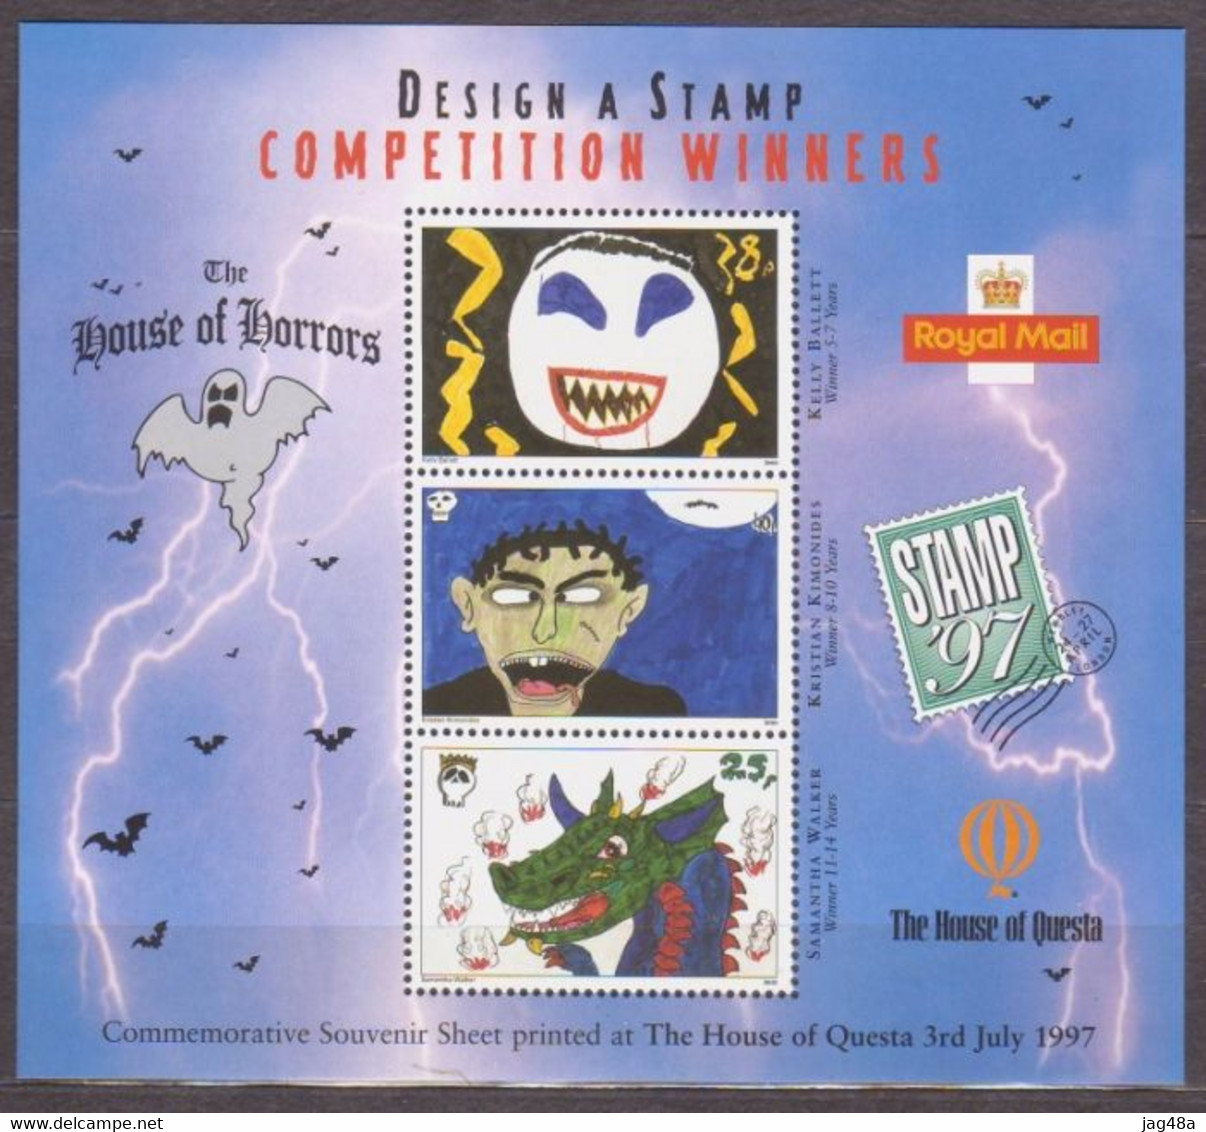 UNITED KINGDOM.  1997/Stamp'97 - Design A Stamp Competition Winners - Sheetlet/unused. - Timbres Personnalisés